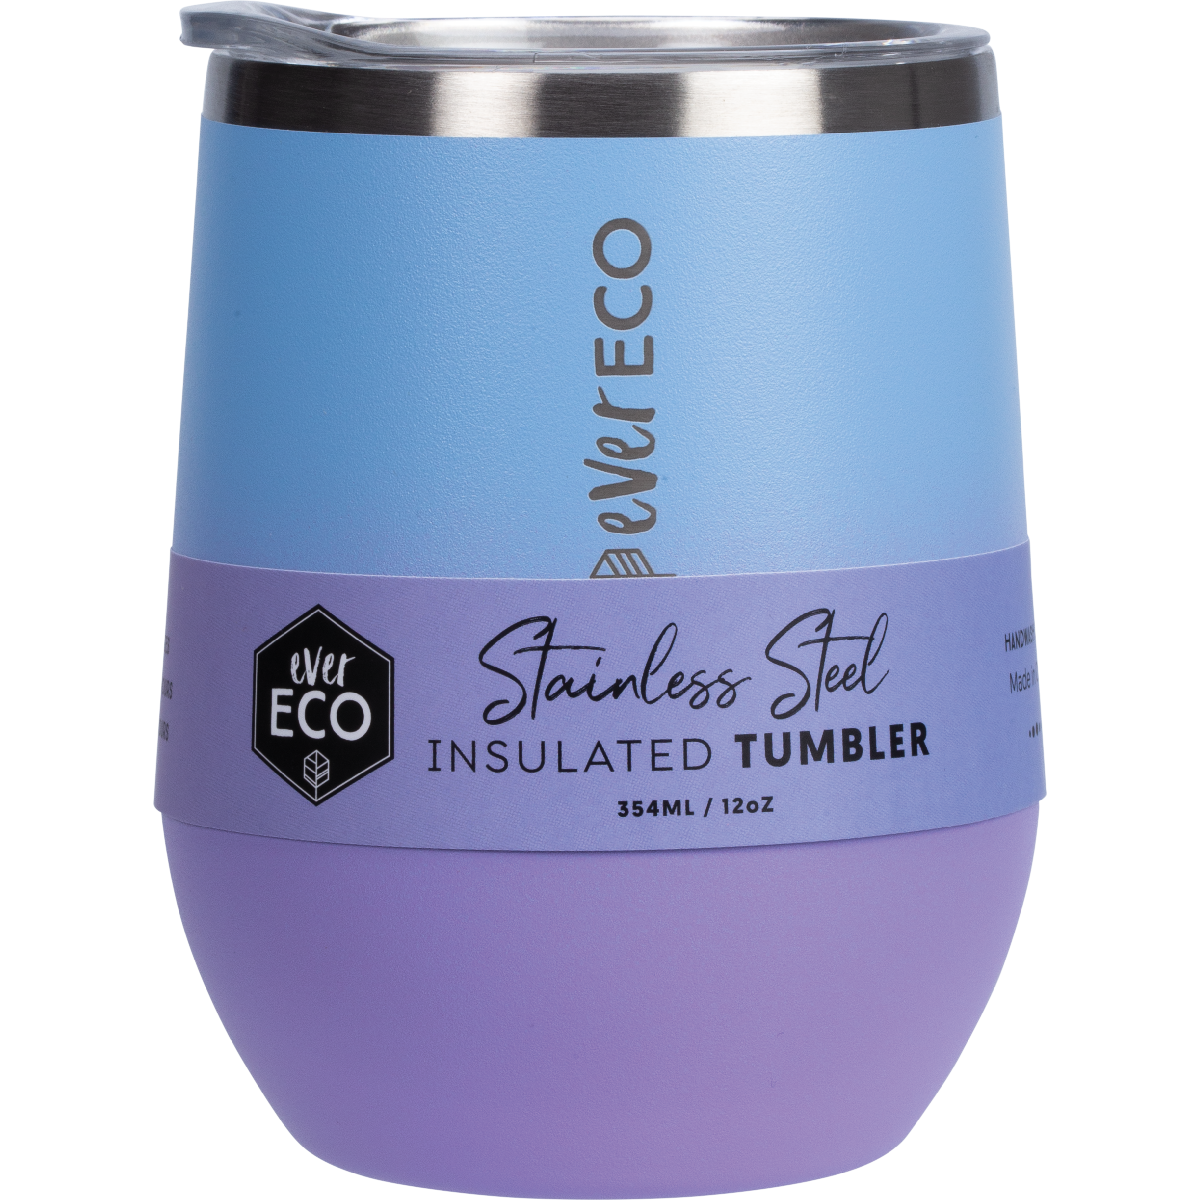 Ever-Eco-Stainless-Steel-Insulated-Tumbler-354ml-Balance